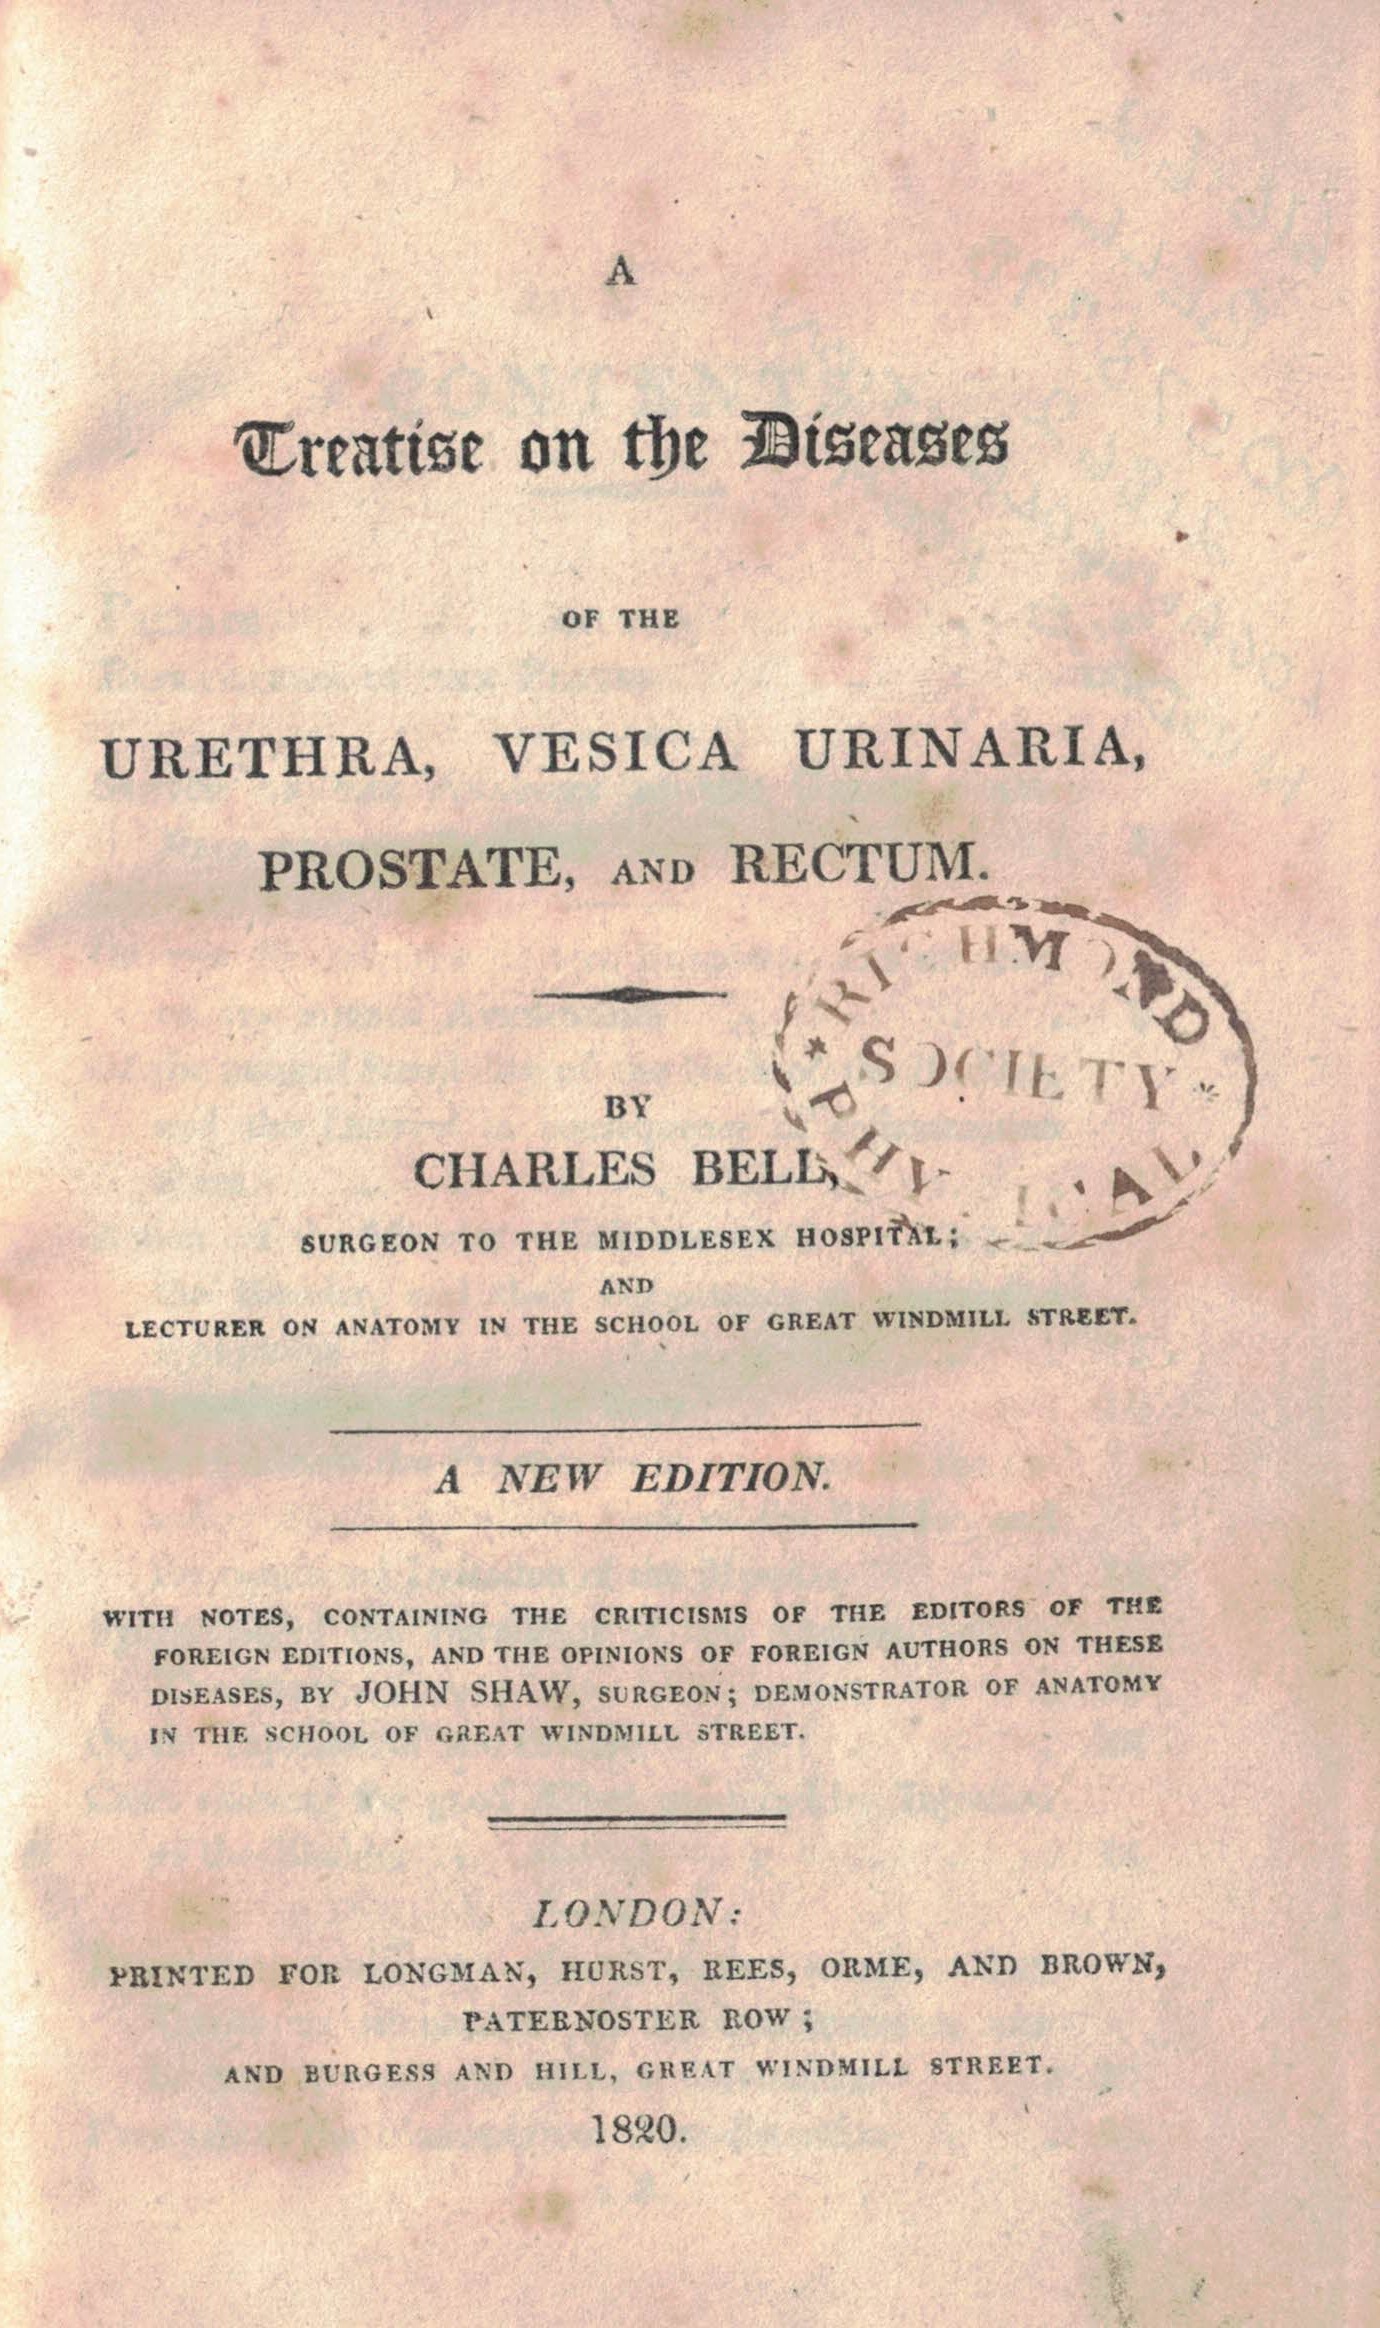 A Treatise on the Diseases of the Urethra, Vesica Urinaria, Prostate and Rectum.